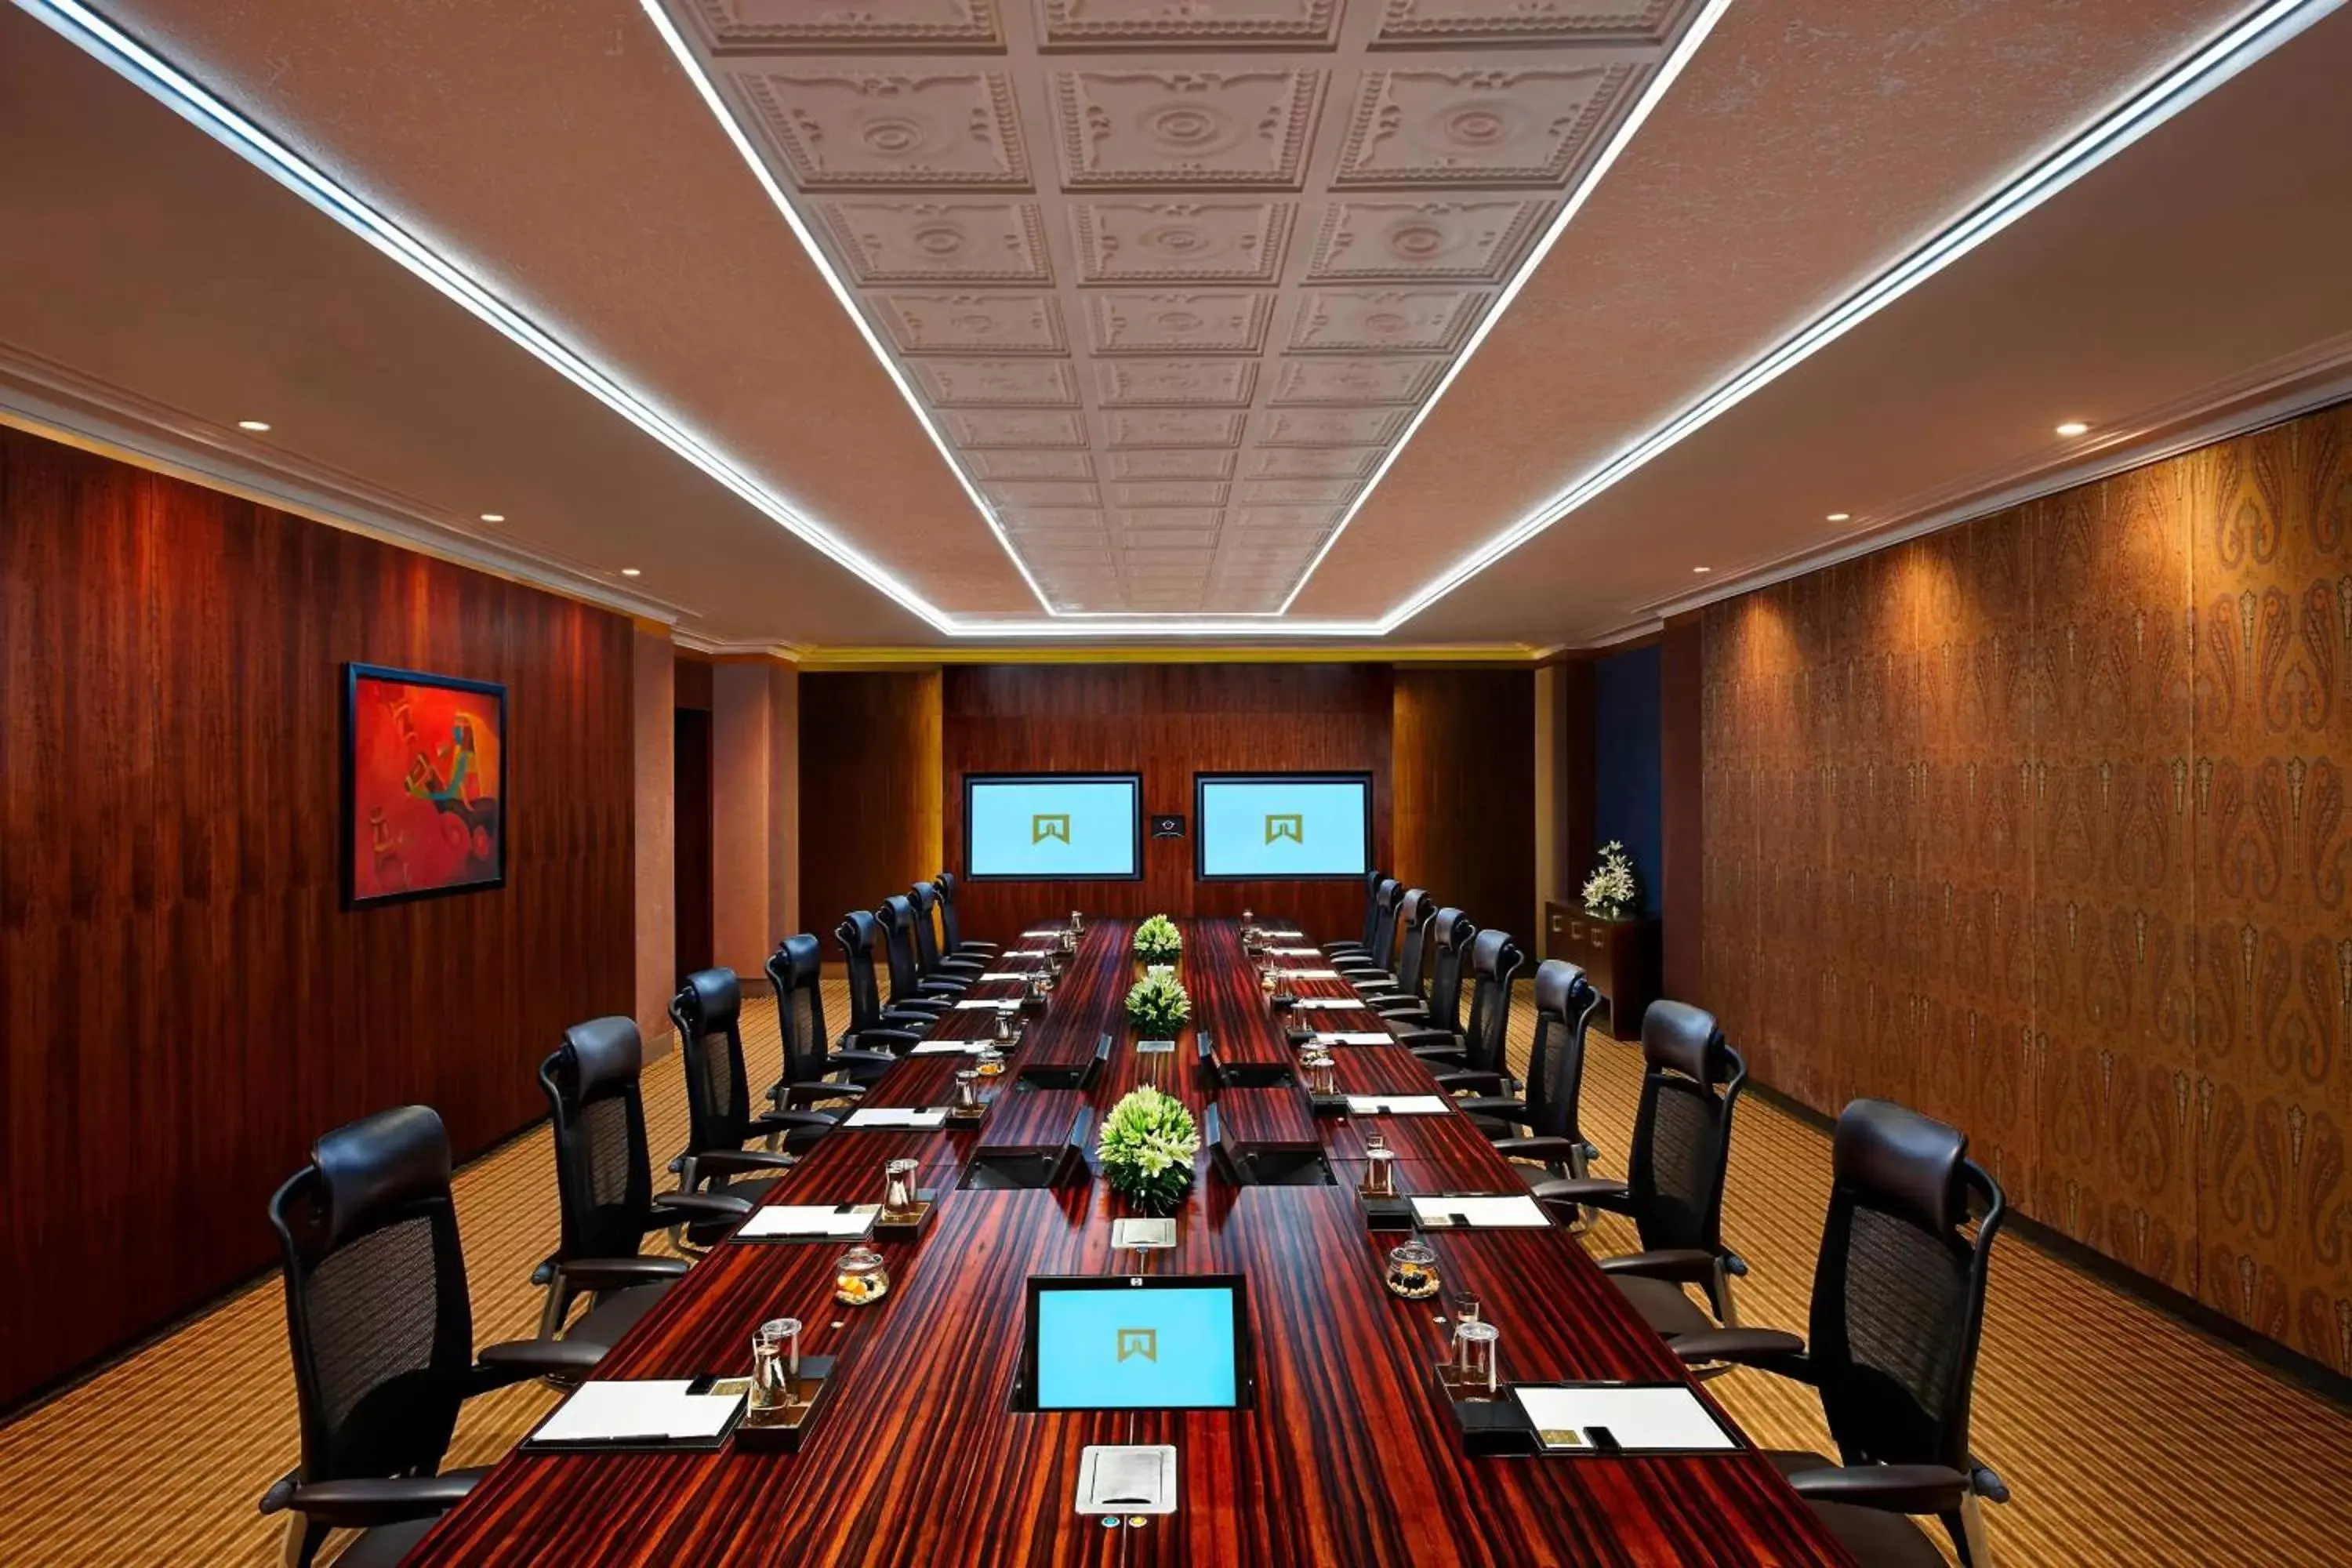 Meeting/conference room in ITC Grand Chola, a Luxury Collection Hotel, Chennai